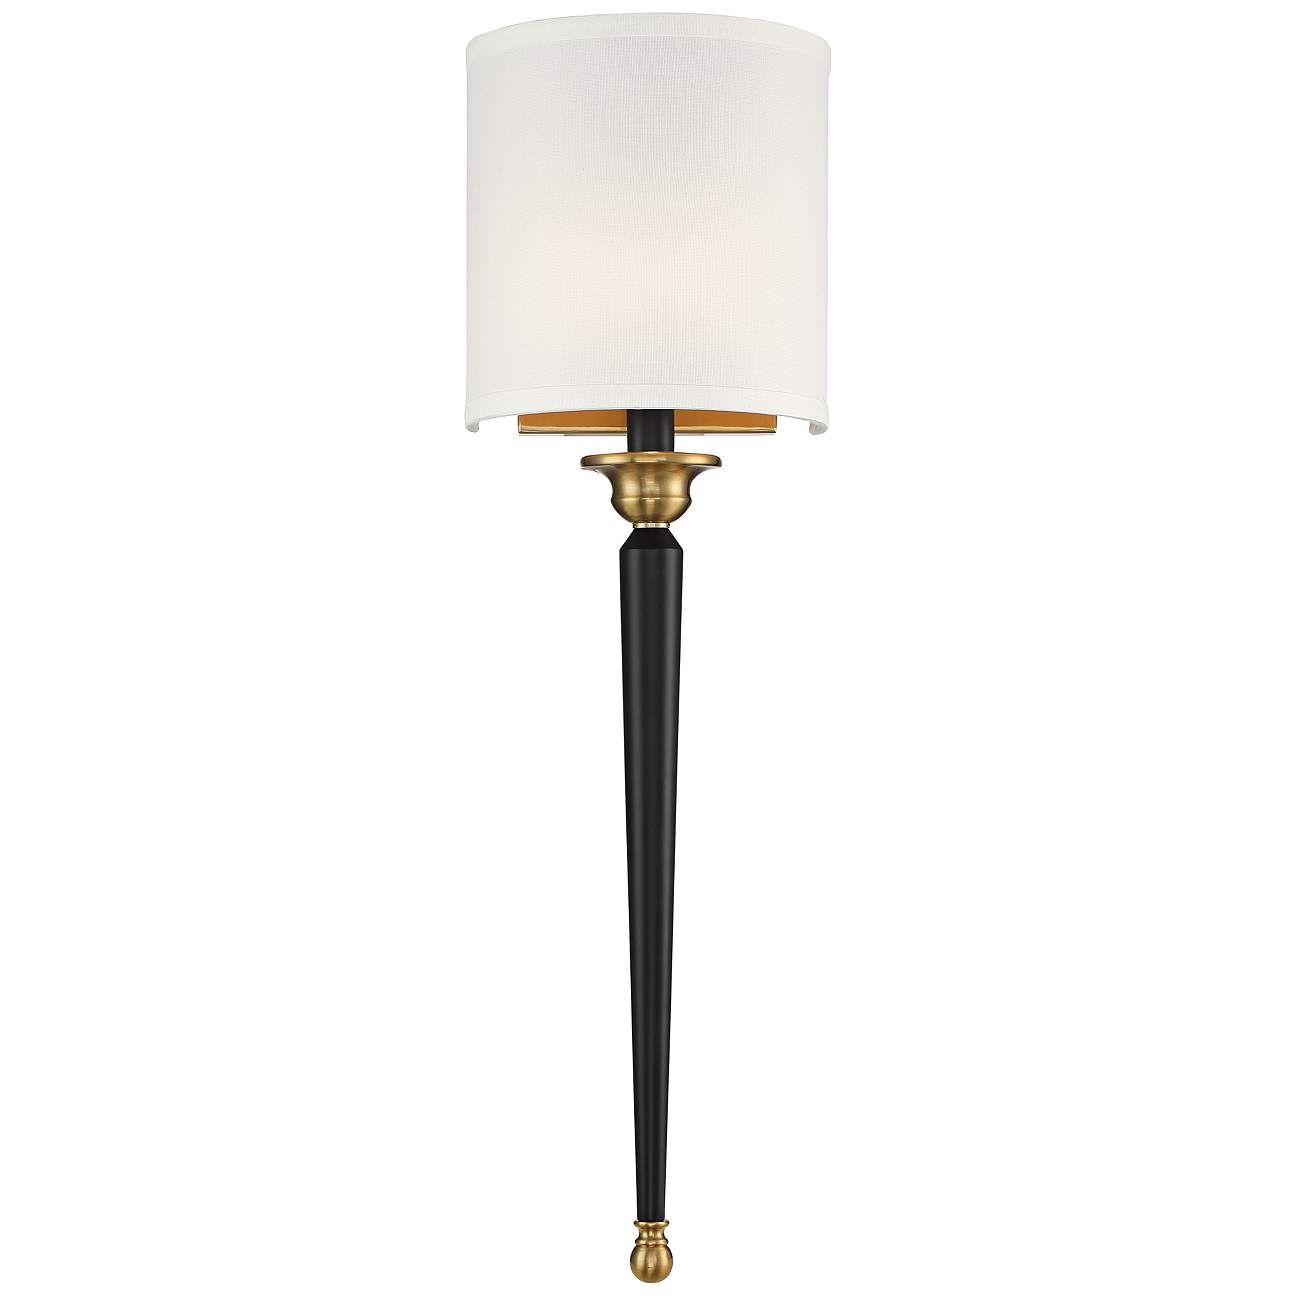 Possini Euro Arletta 26" High Black and Brass Wall Sconce - #95W82 | Lamps Plus | Lamps Plus